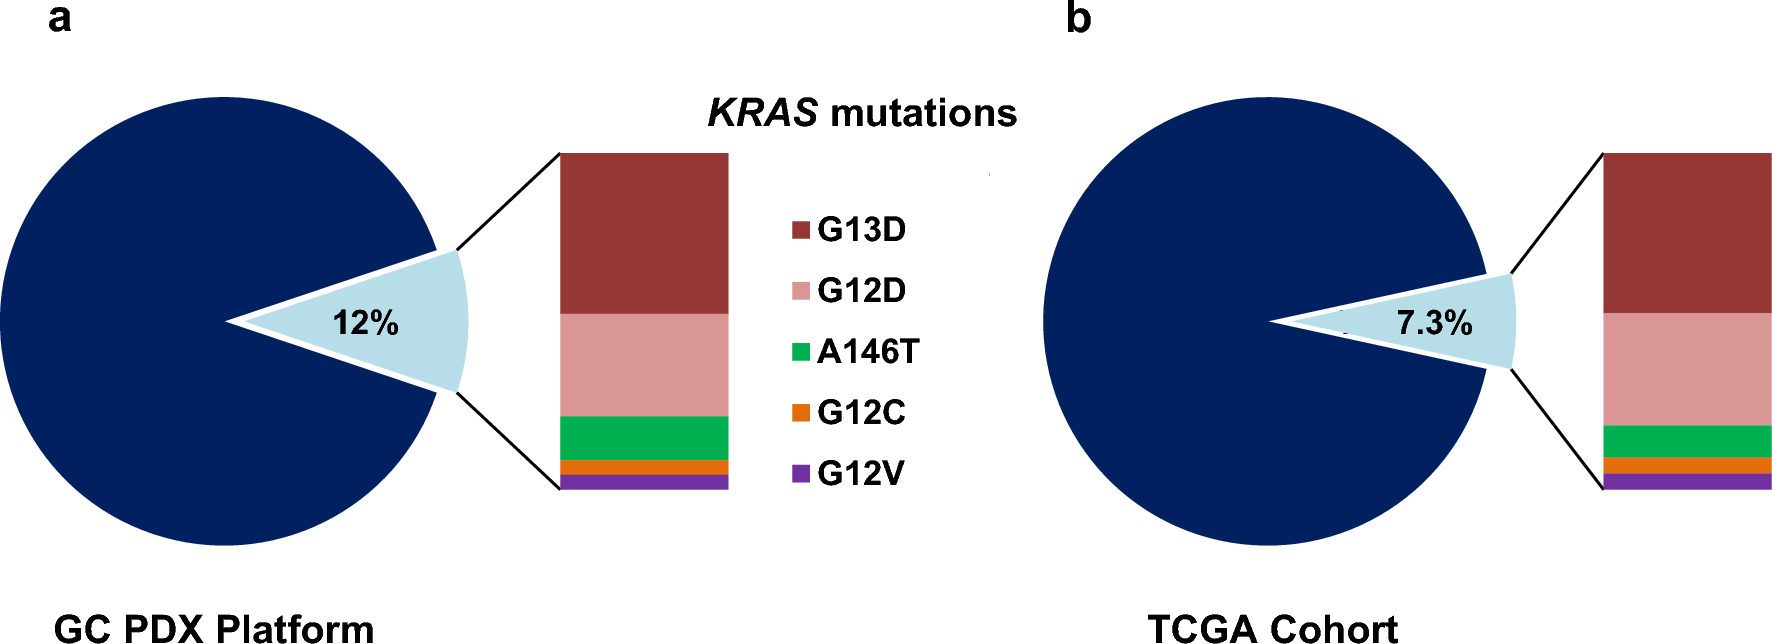 Biological and targeting differences between the rare KRAS A146T and canonical KRAS mutants in gastric cancer models